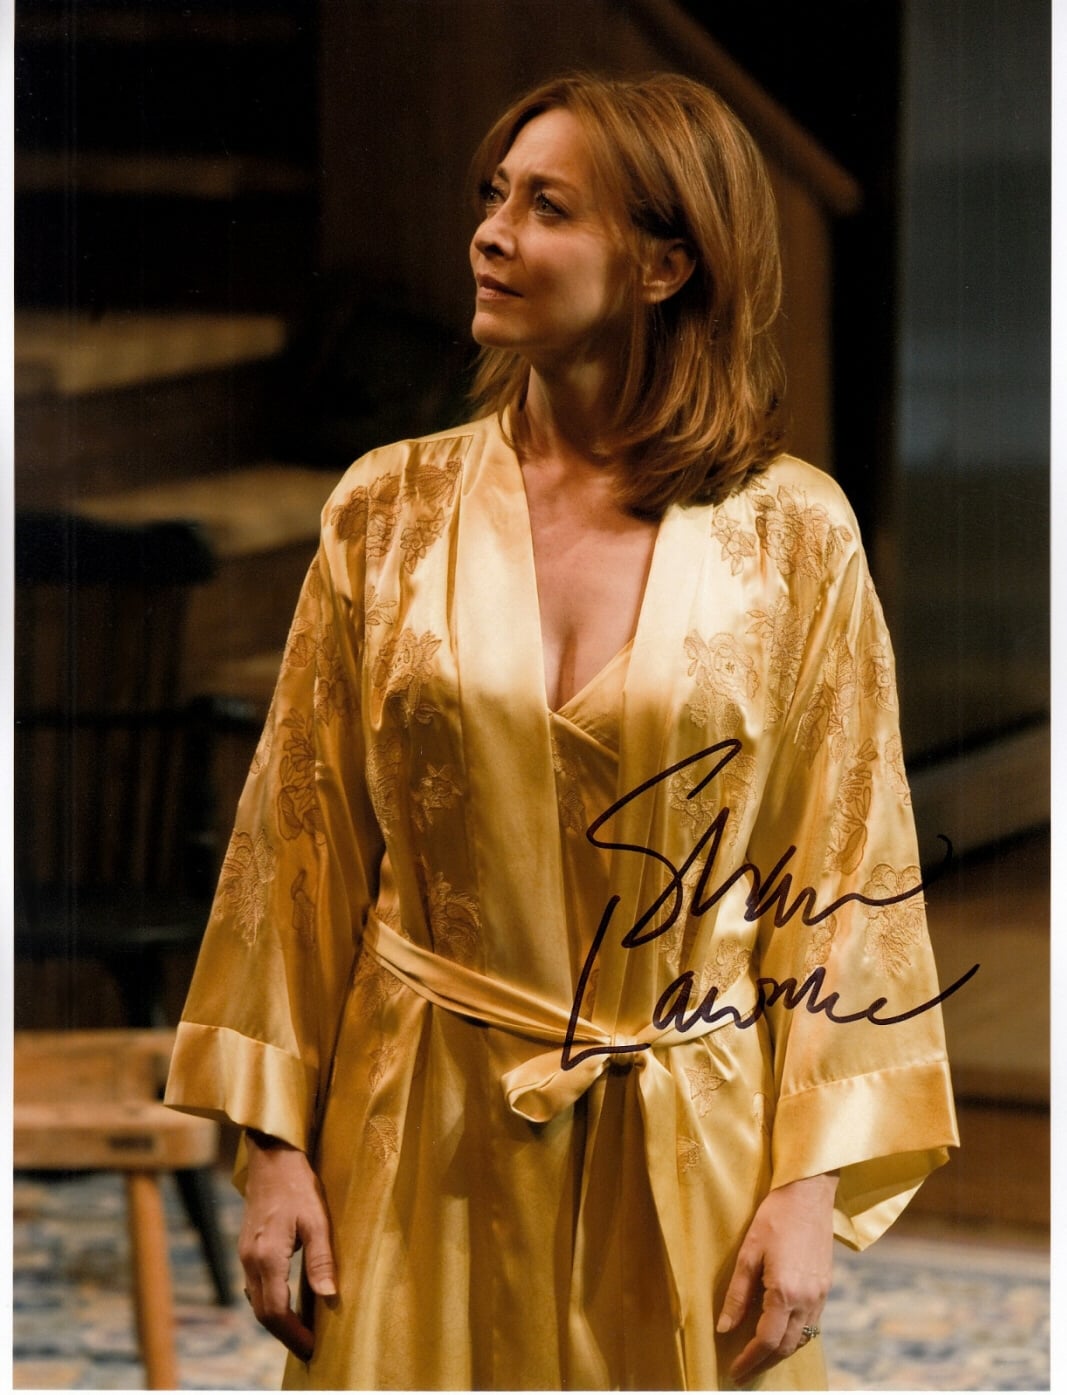 2016 sharon lawrence Game of